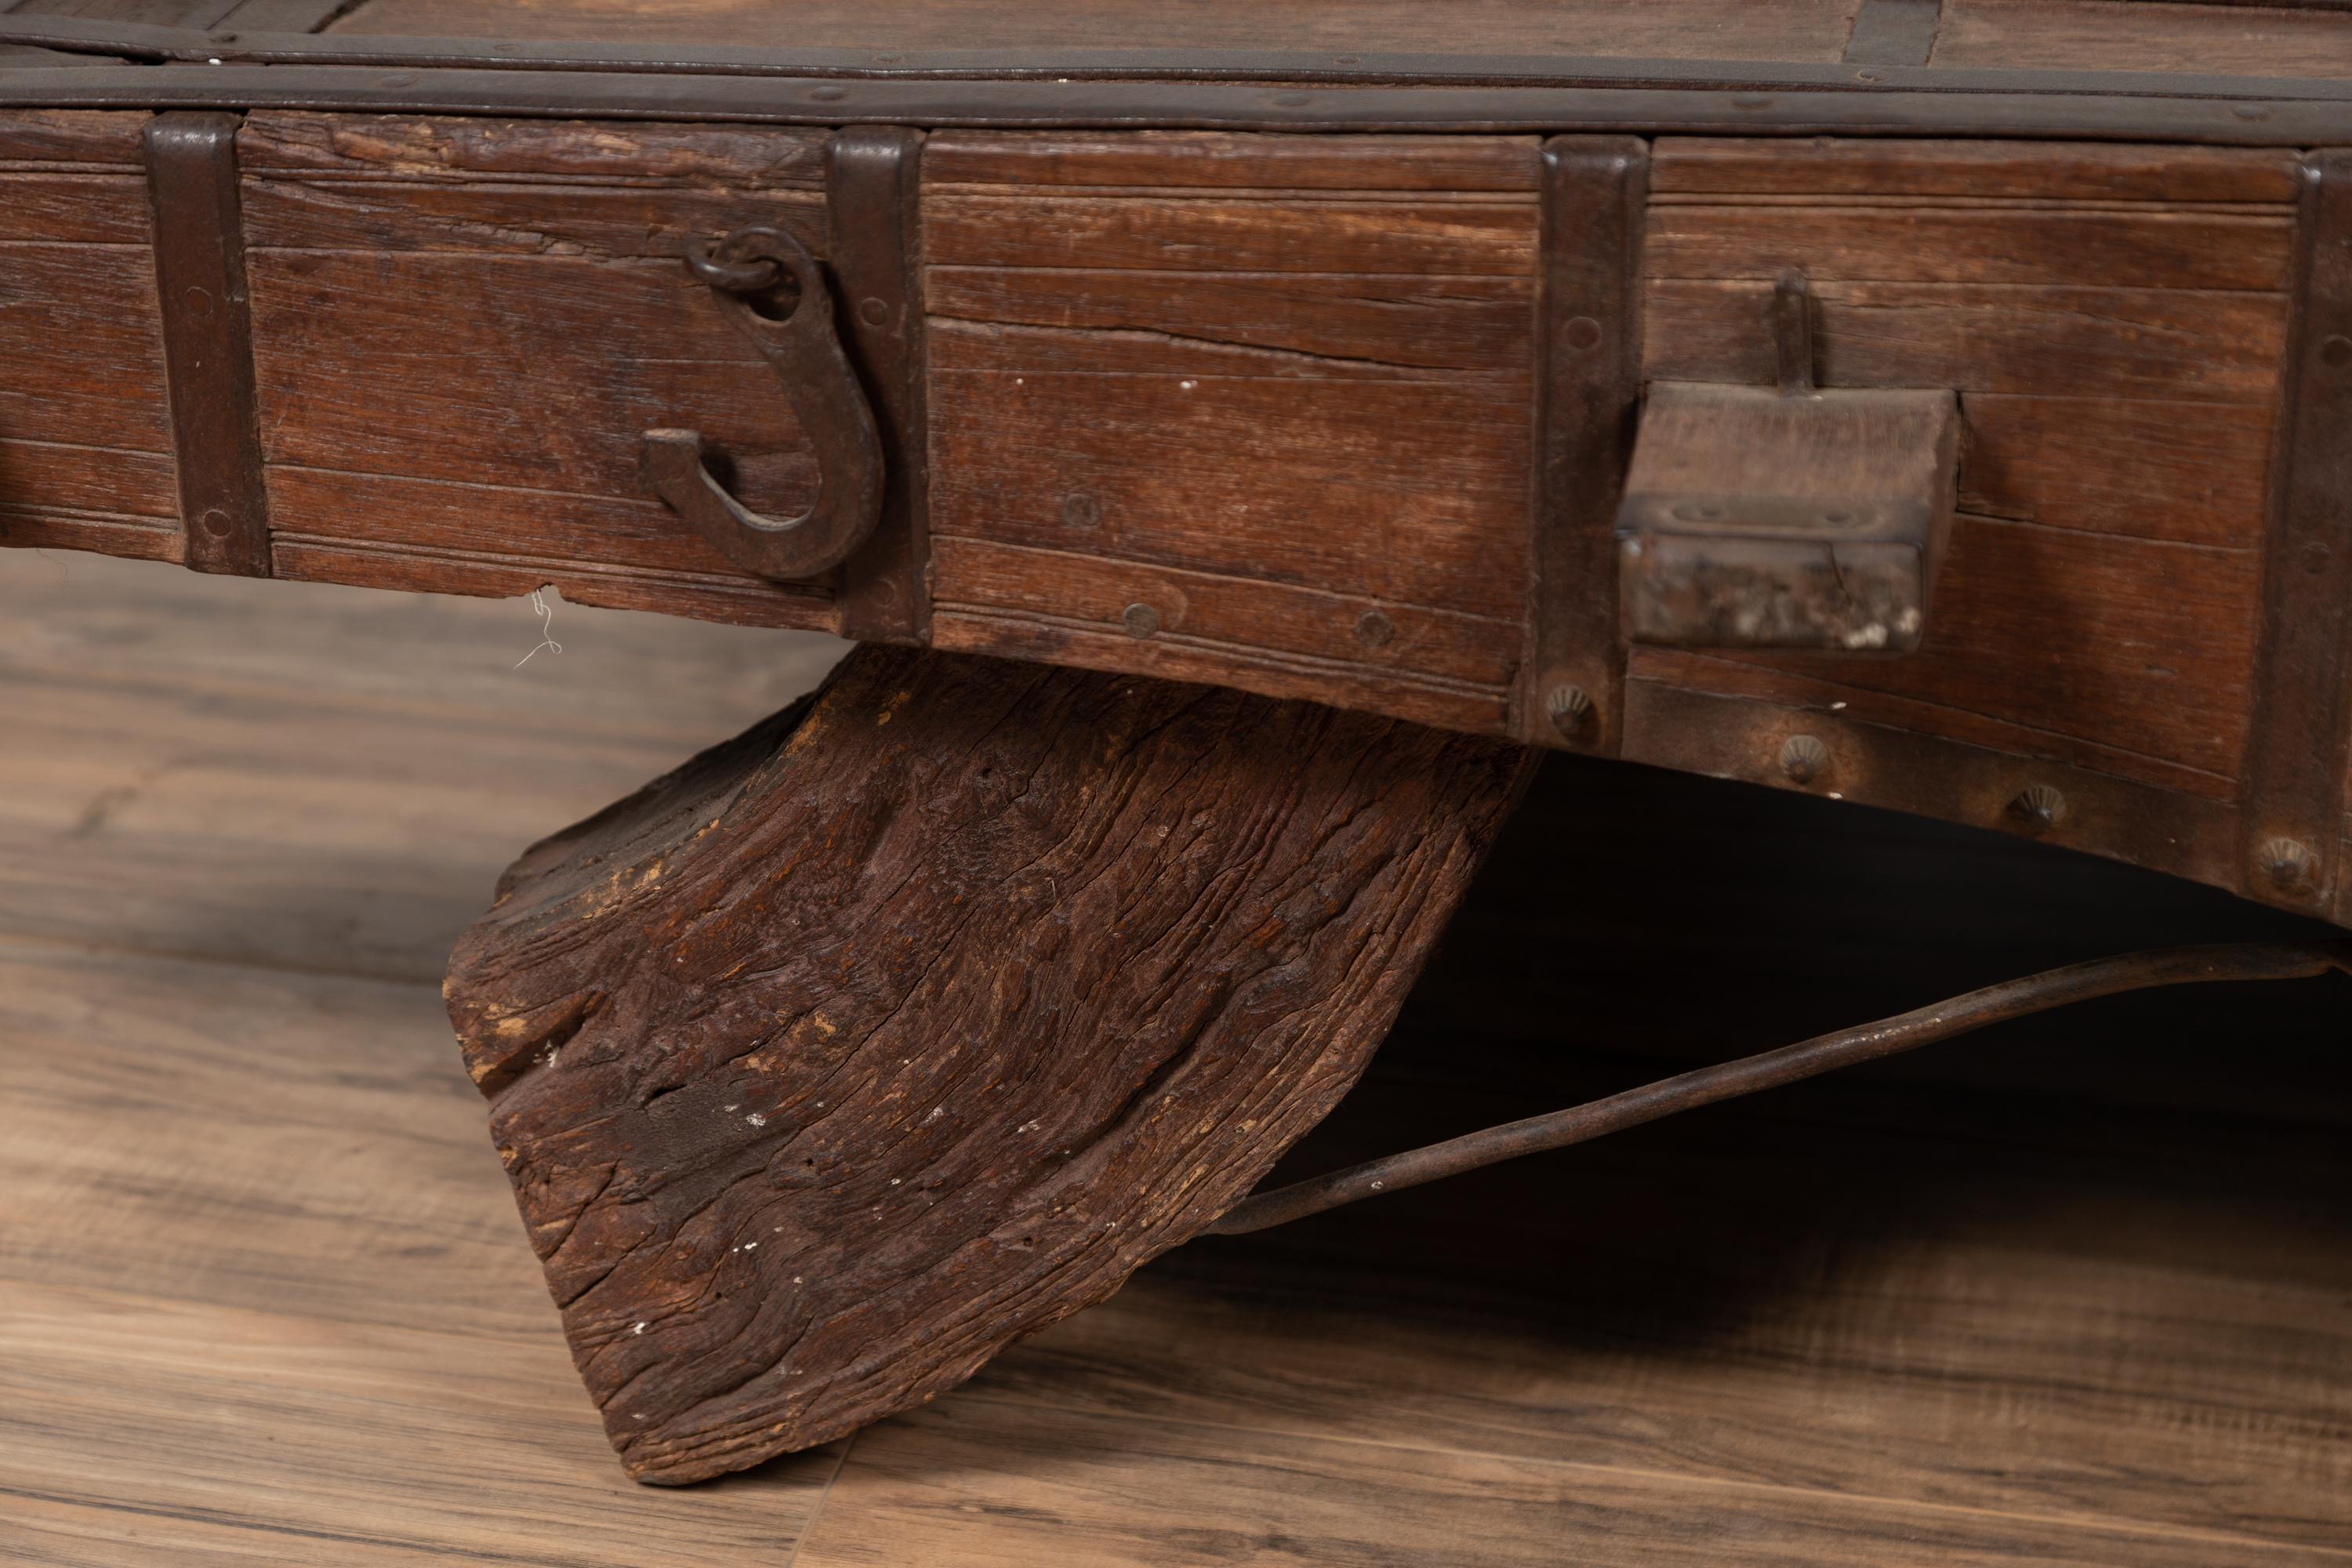 19th Century Indian Rustic Antique Wooden Ox Cart with Metal Accents Made into a Coffee Table